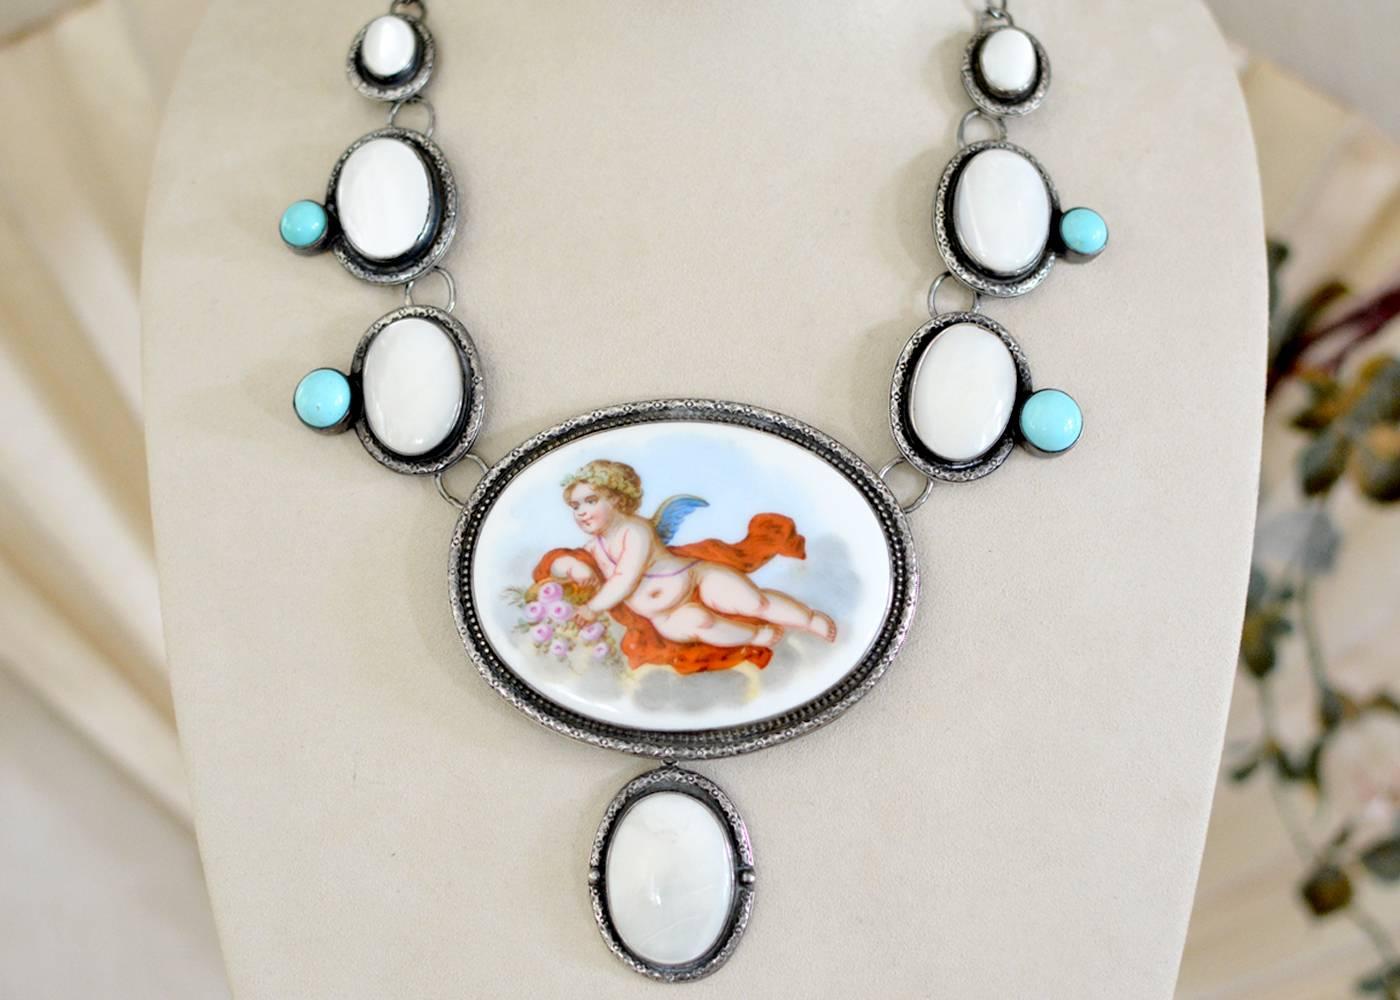 A romantic large antique French hand painted porcelain depicting a cherub cradling a basket of pink roses dating to the nineteenth century stands front and center in this one of a kind necklace. The grande 30 x 22 mm high dome natural